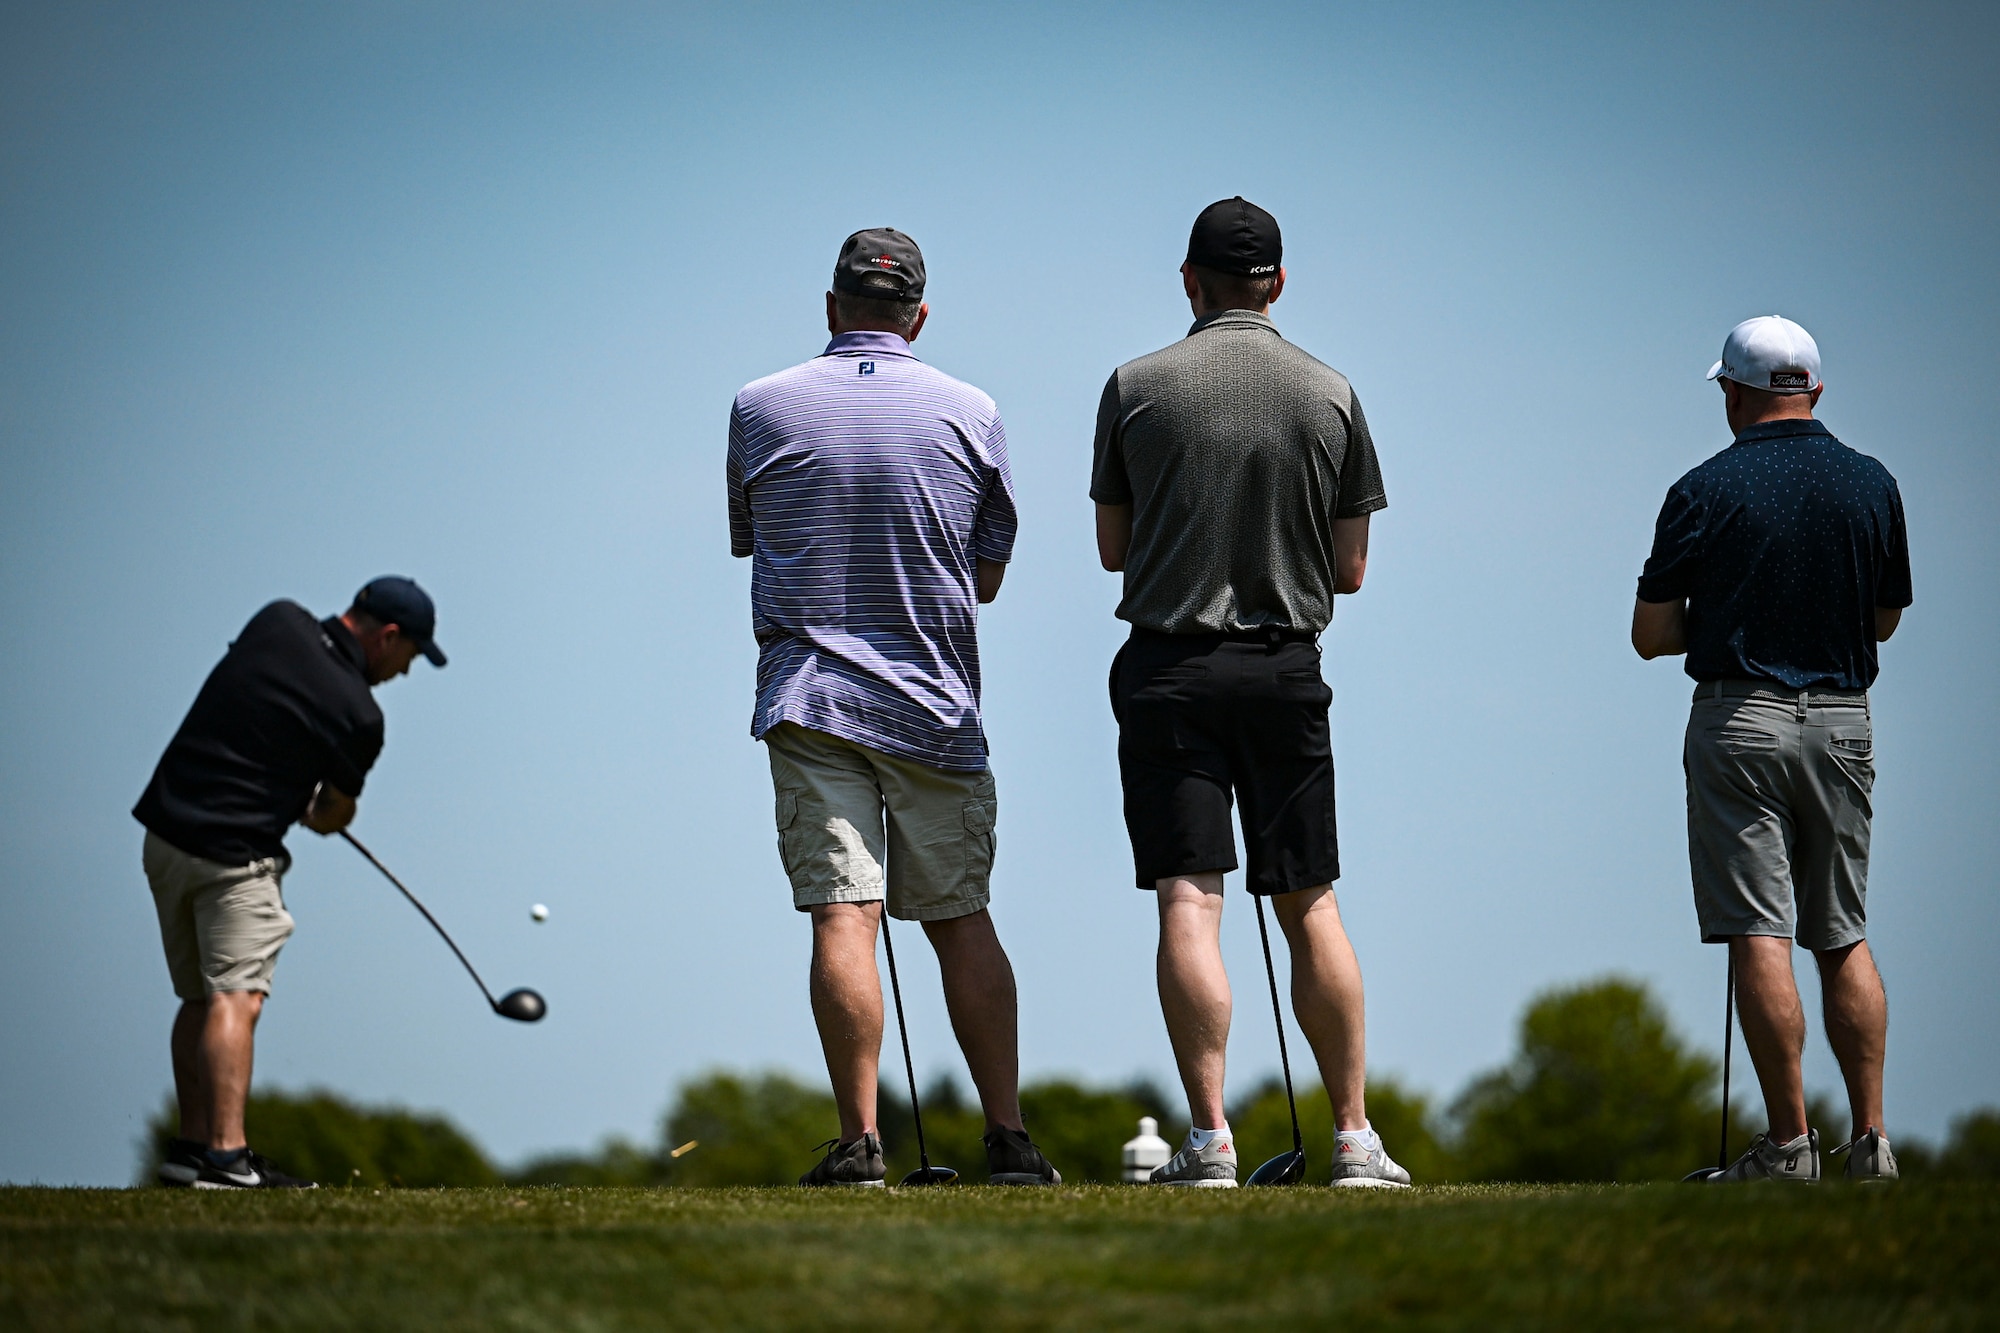 A group of participants watch as a teammate tees off during the Bluesuiters Golf Tournament at Jonathan’s Landing Golf Course in Magnolia, Delaware, May 11, 2023. Bluesuiters is a biannual golf tournament aimed at connecting Team Dover Airmen with local civic and business leaders. (U.S. Air Force photo by Staff Sgt. Marco A. Gomez)